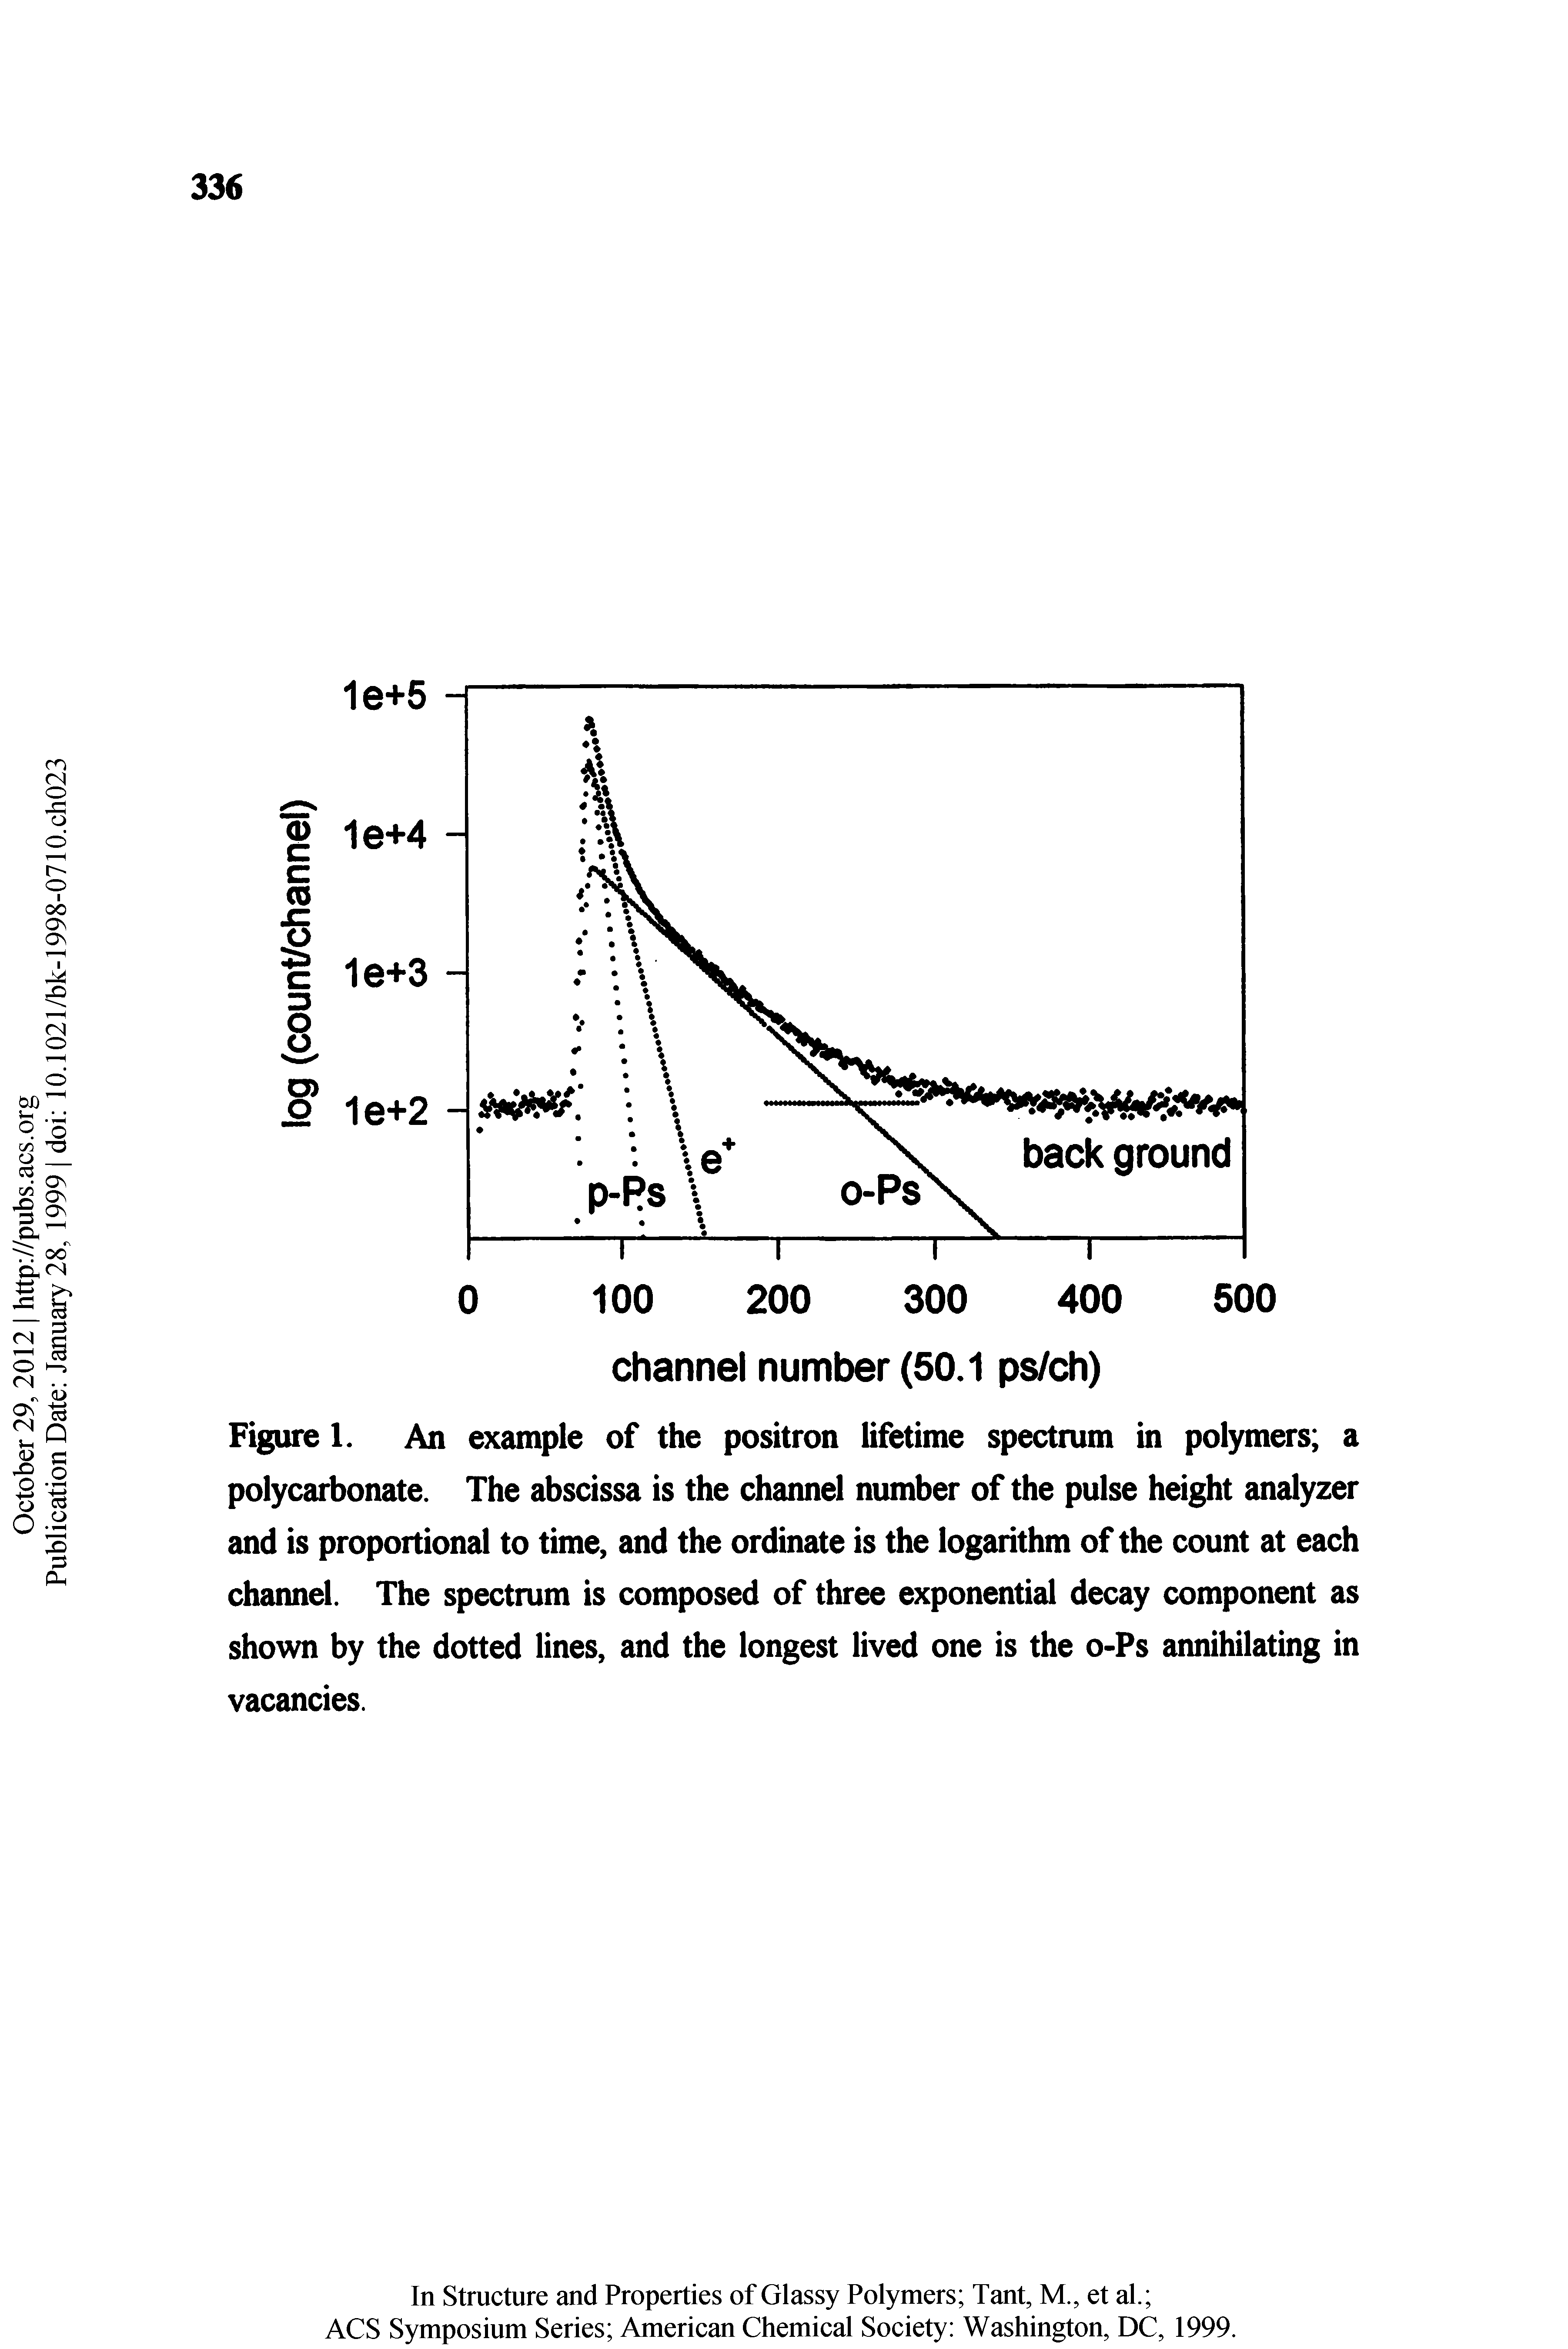 Figure 1. An example of the positron lifetime spectrum in polymers a polycarbonate. The abscissa is the channel number of the pulse height analyzer and is proportional to time, and the ordinate is the logarithm of the count at each channel. The spectrum is composed of three exponential decay component as shown by the dotted lines, and the longest lived one is the o-Ps annihilating in vacancies.